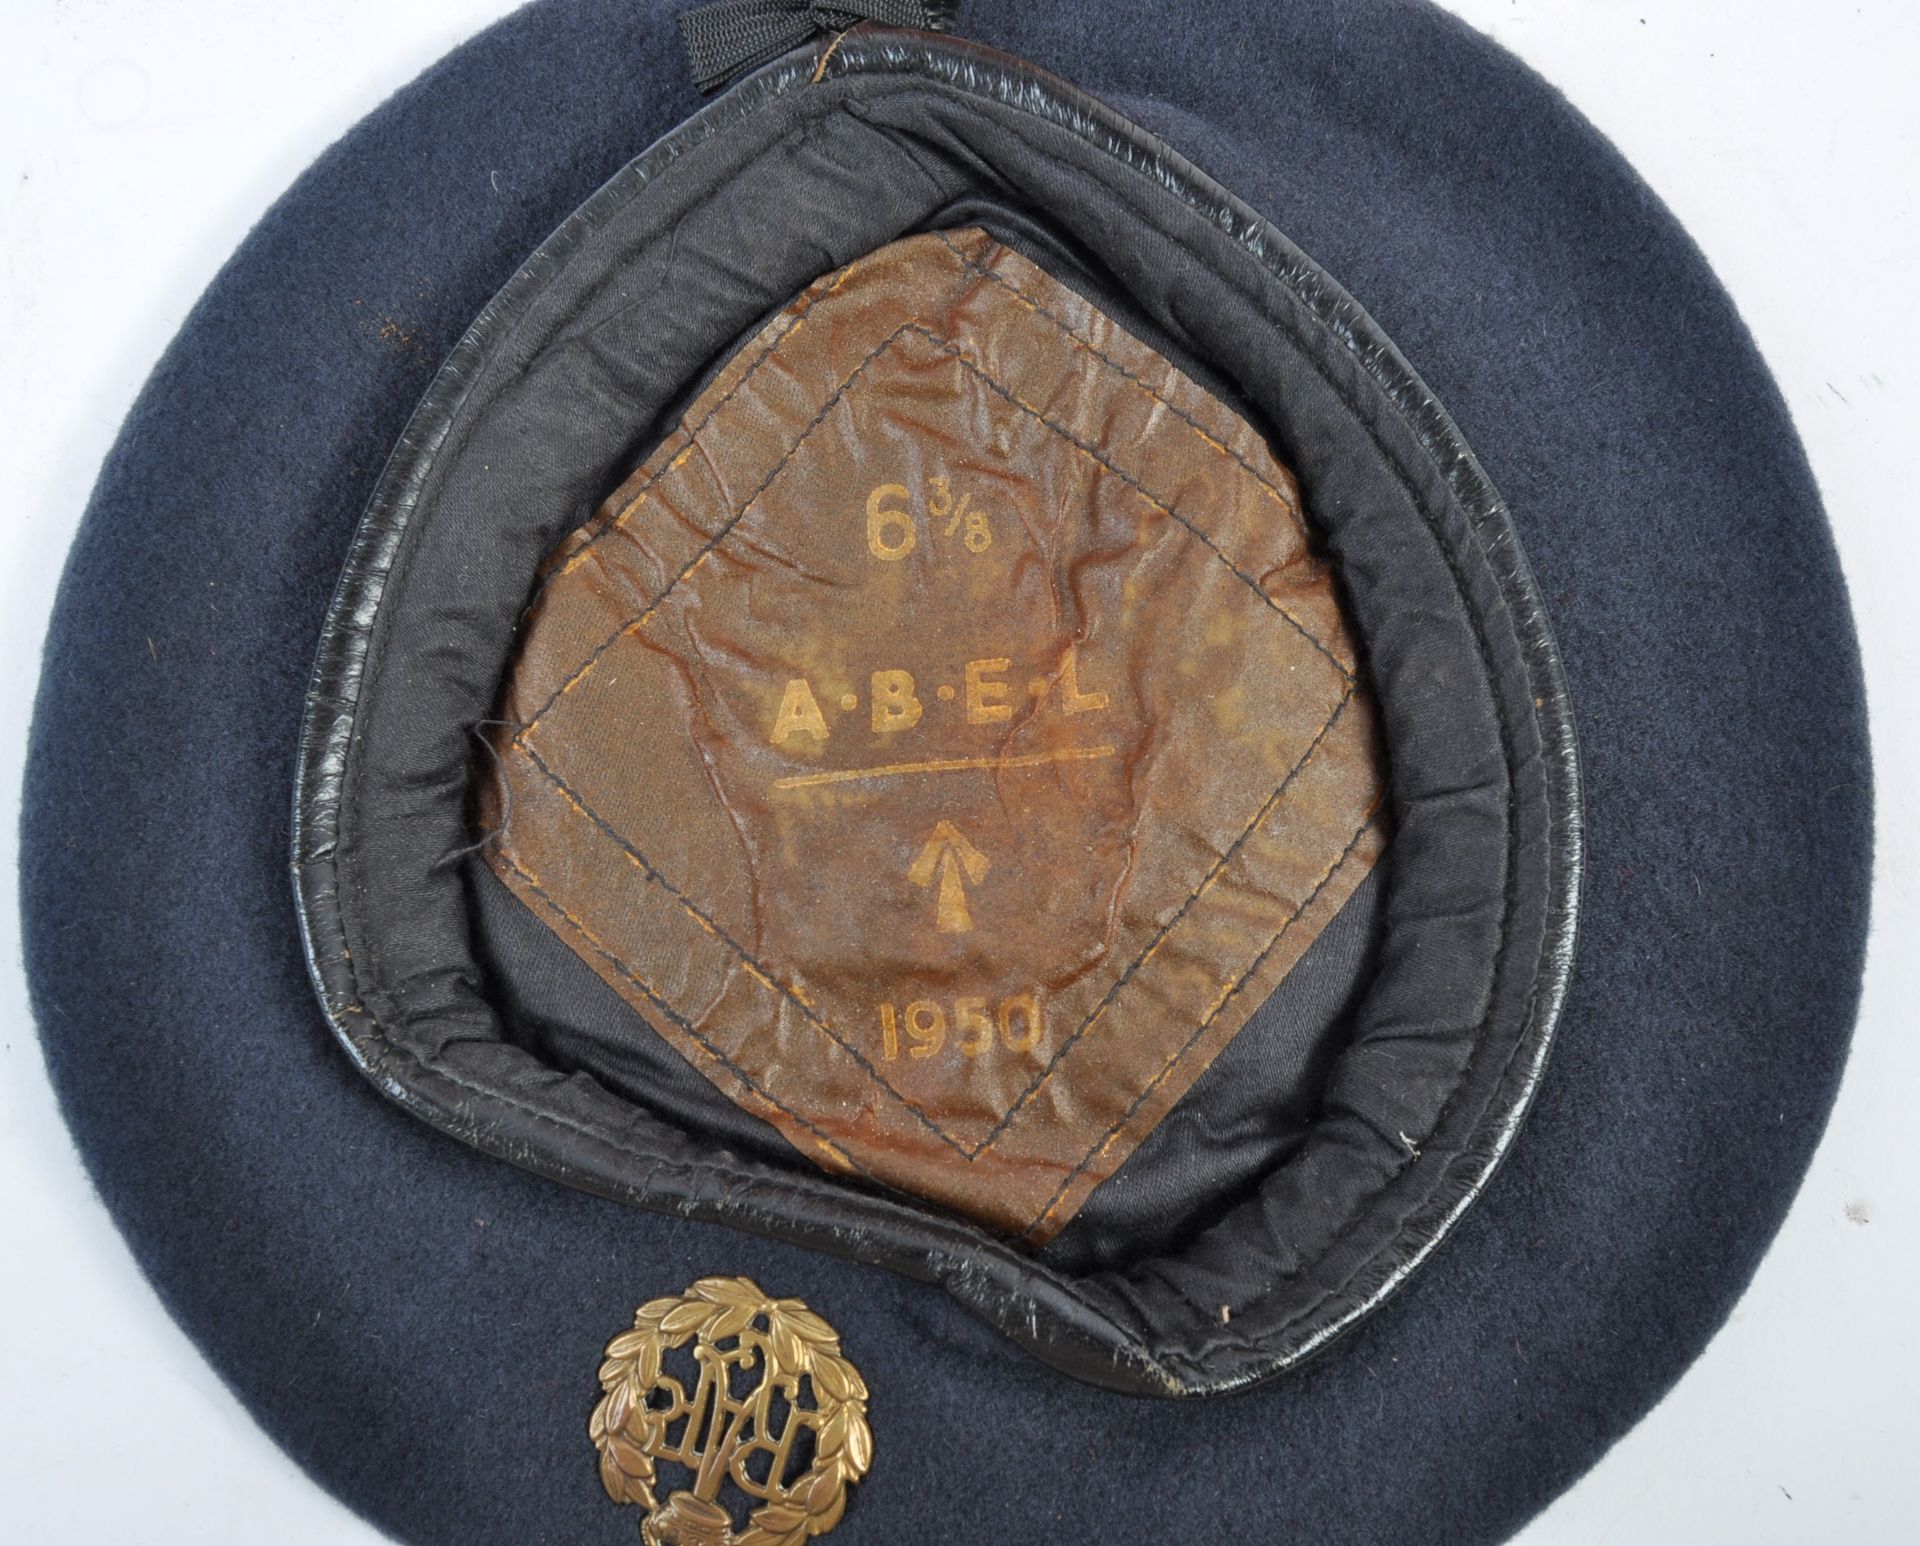 POST WWII SECOND WORLD WAR 1950 ROYAL AIR FORCE BERET - Image 4 of 4